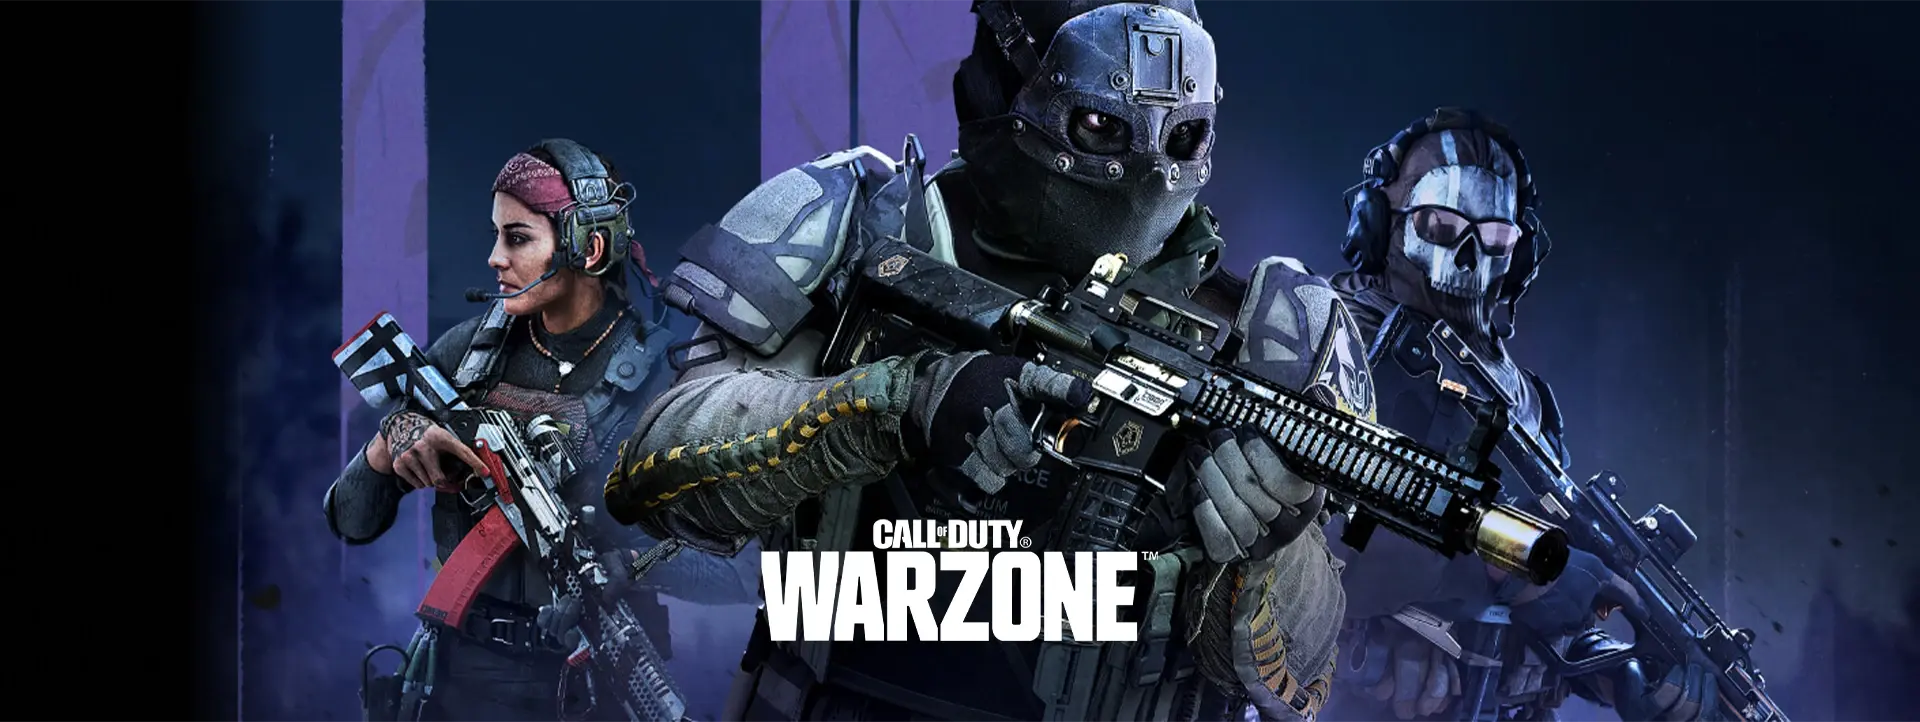 Everything You Need to Know About World Series of Warzone 2023 - TRN  Checkpoint